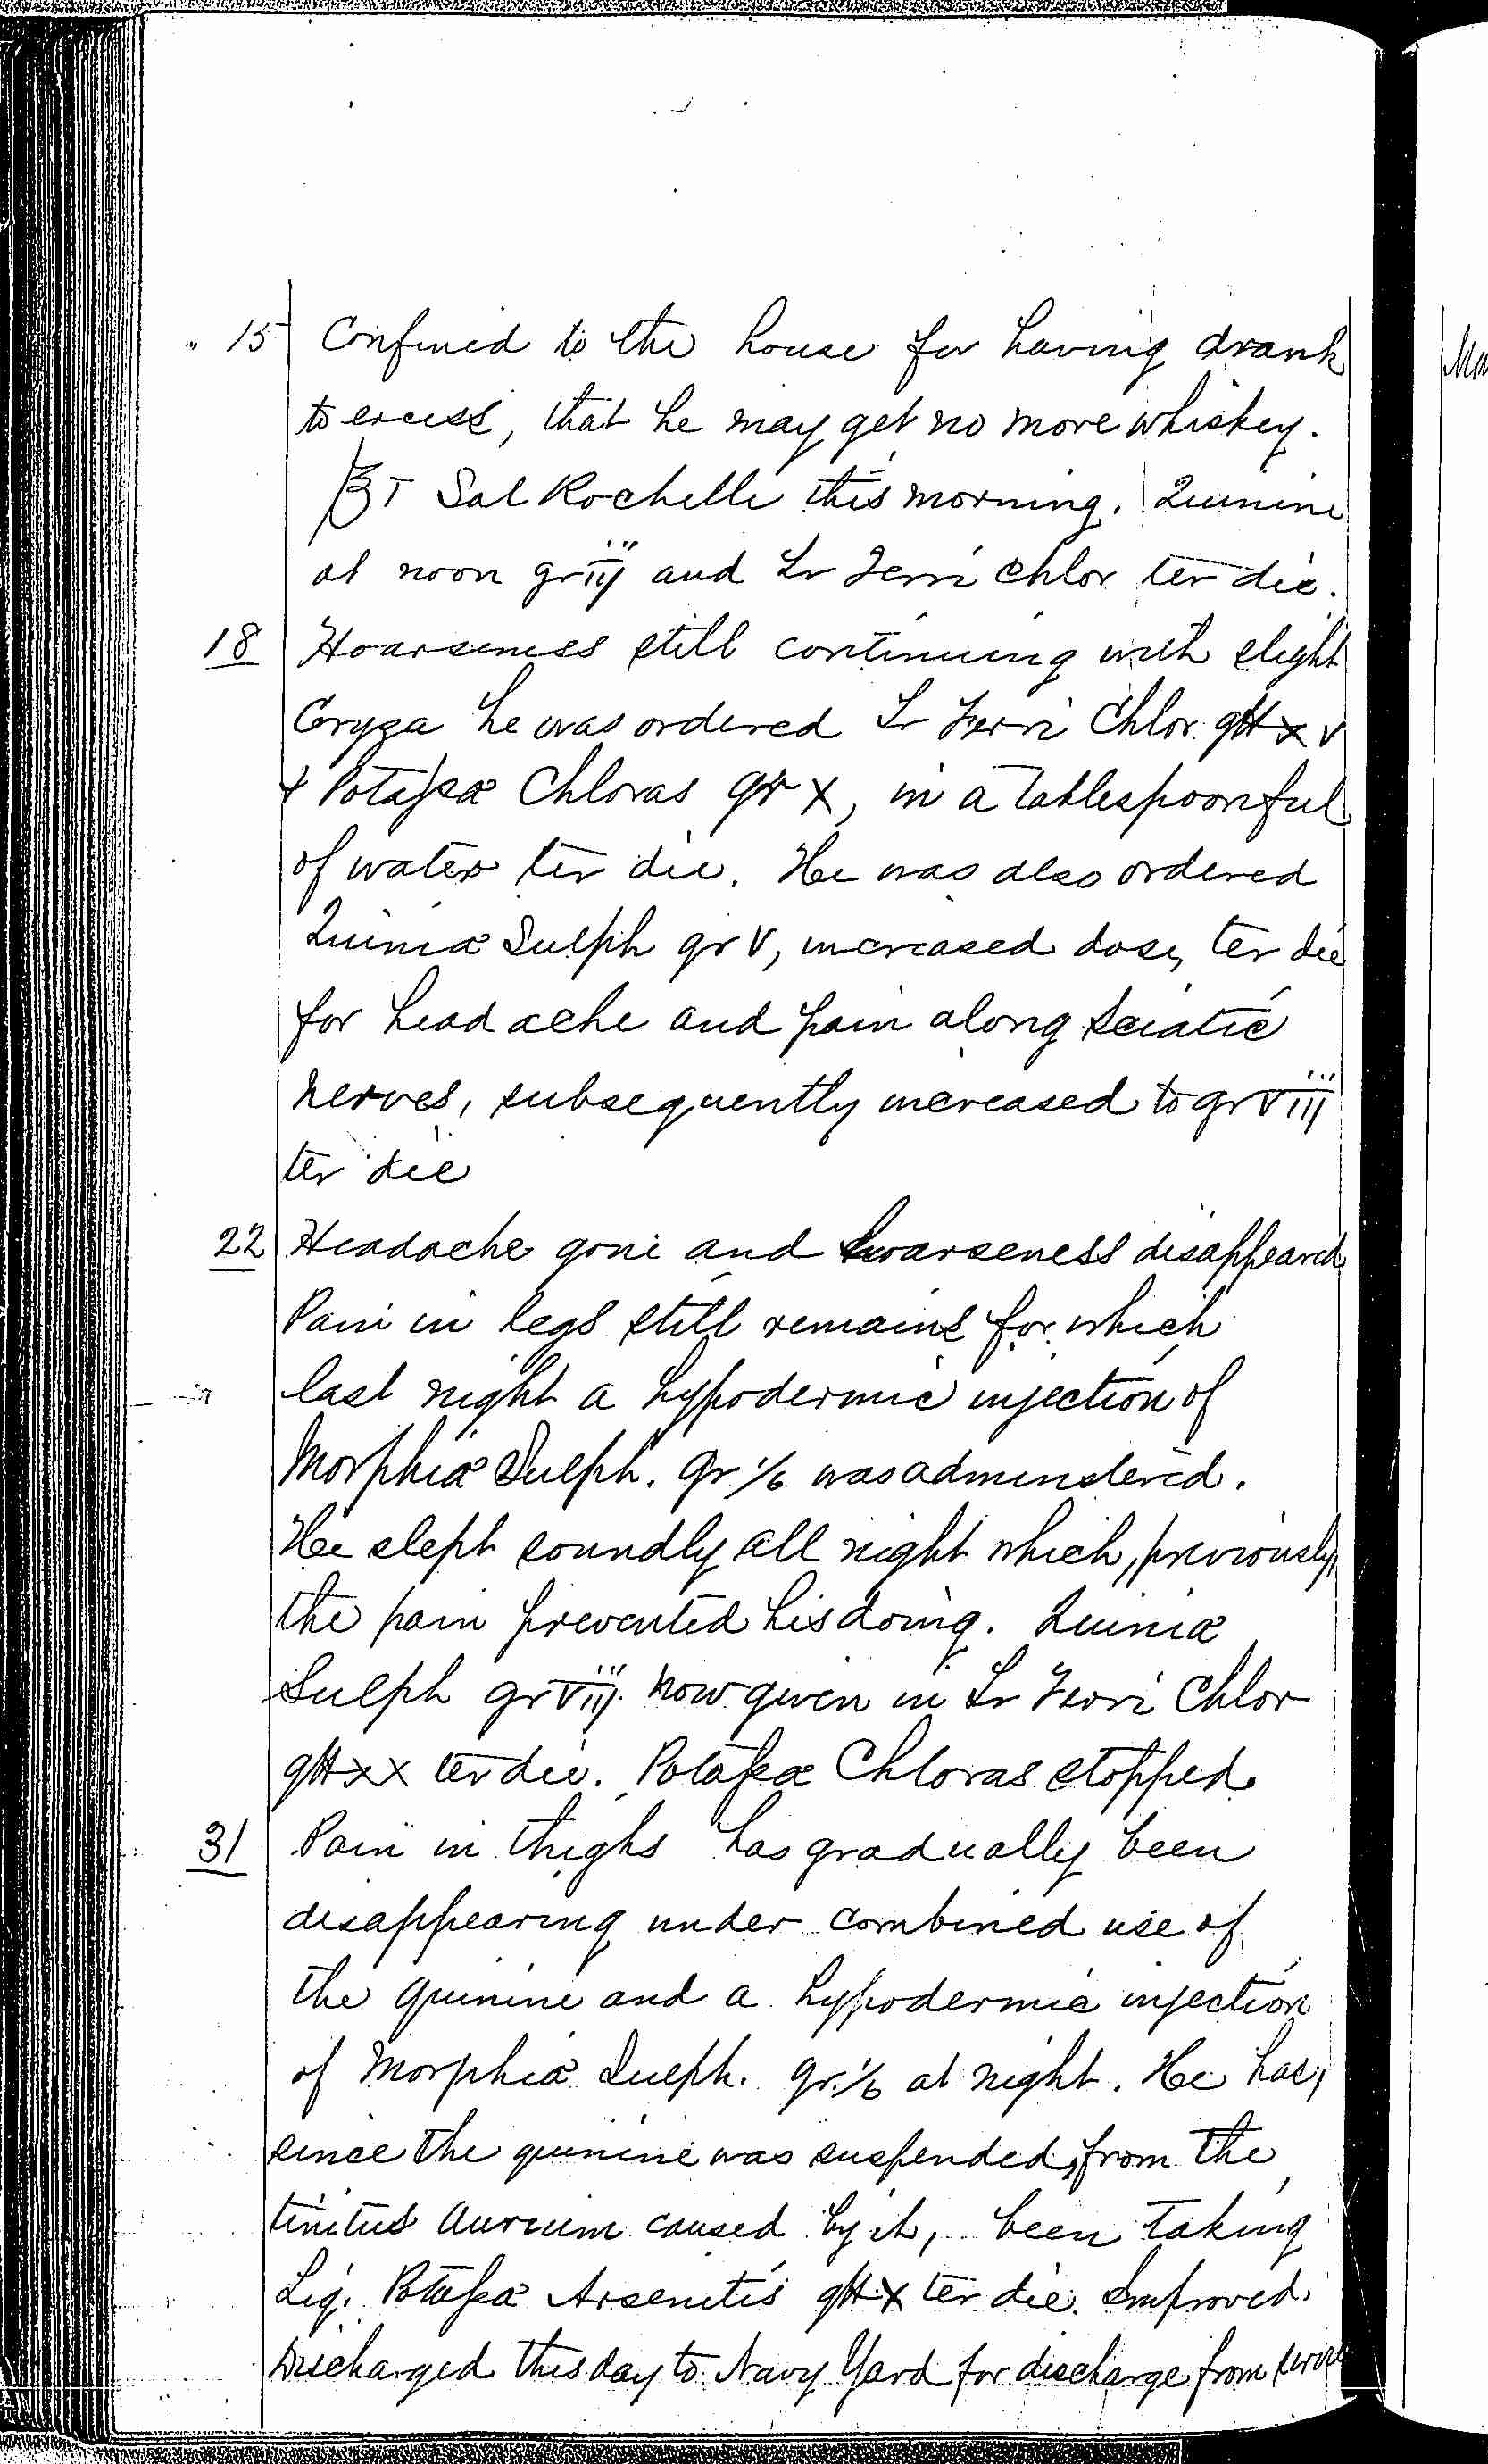 Entry for Frederick Hammett (page 4 of 5) in the log Hospital Tickets and Case Papers - Naval Hospital - Washington, D.C. - 1868-69